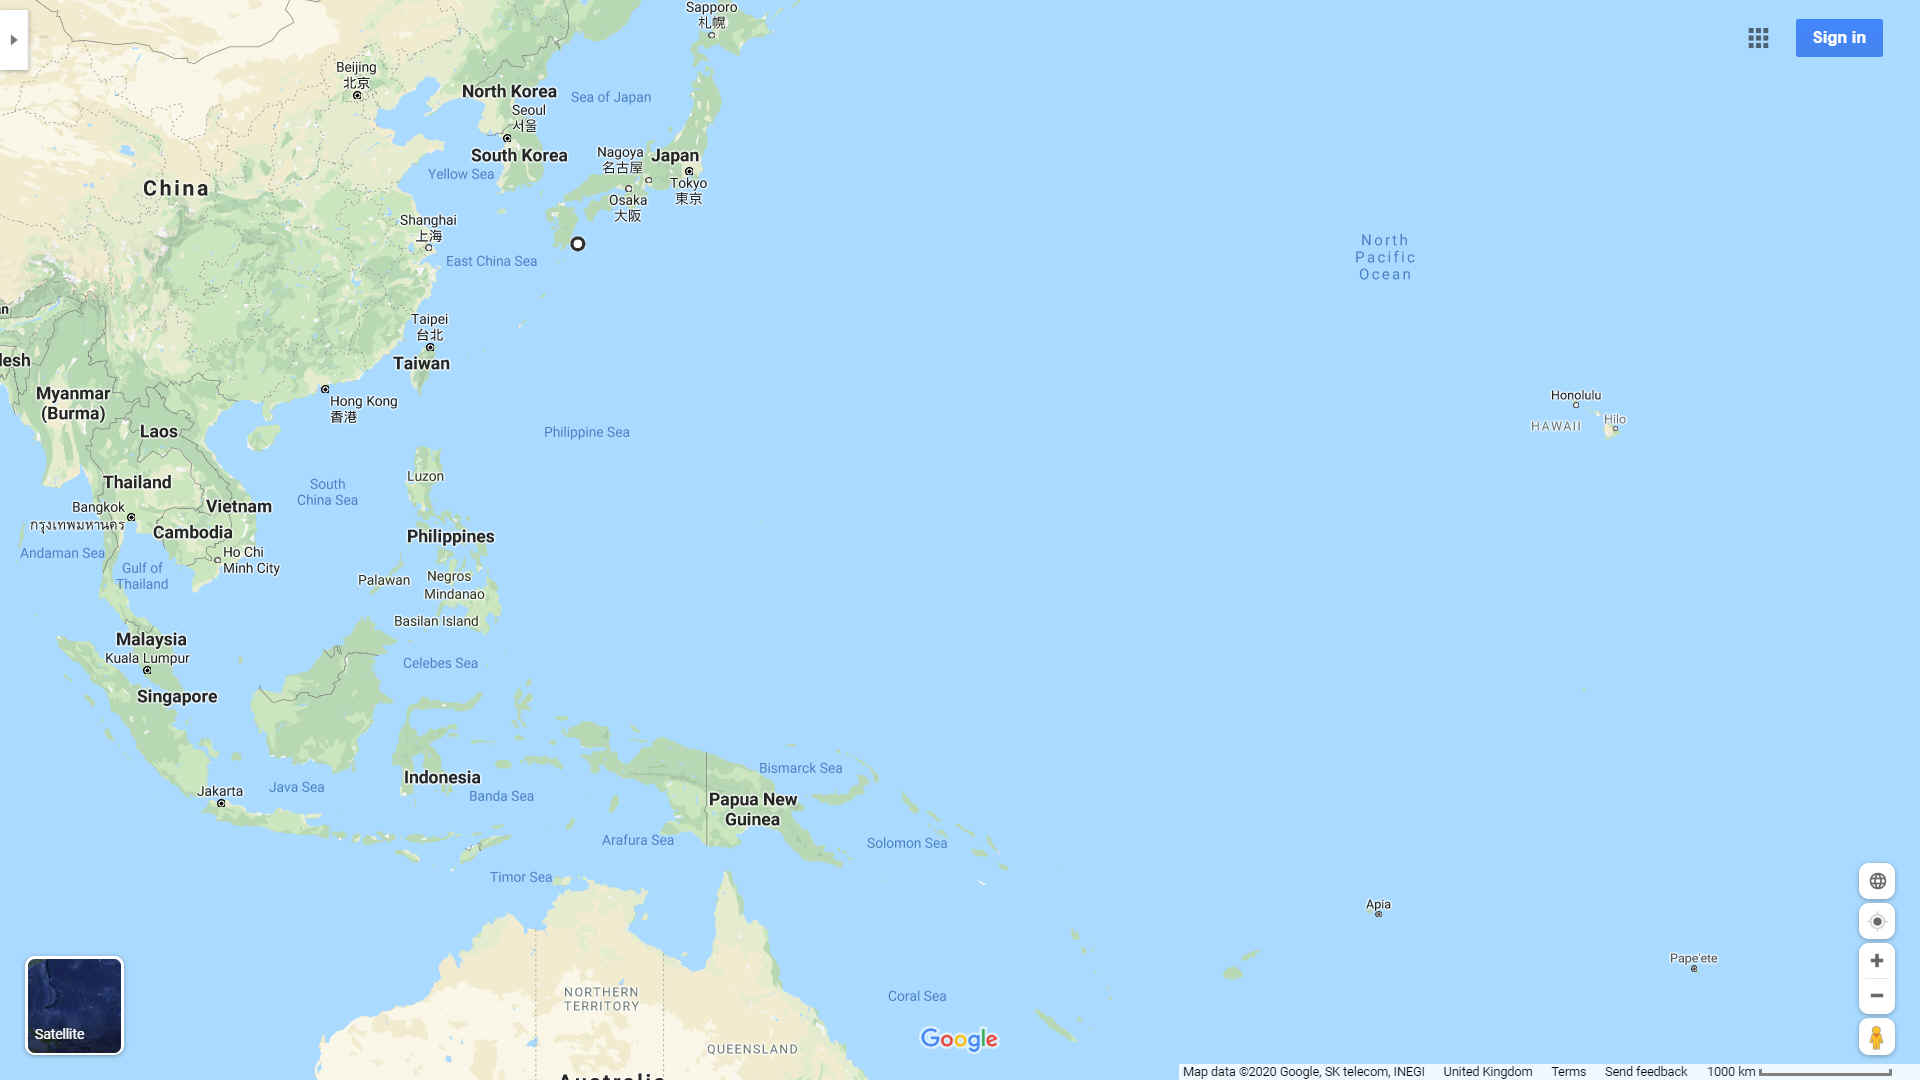 Map of norrth pacific ocean and philippine sea in search of humpback whale